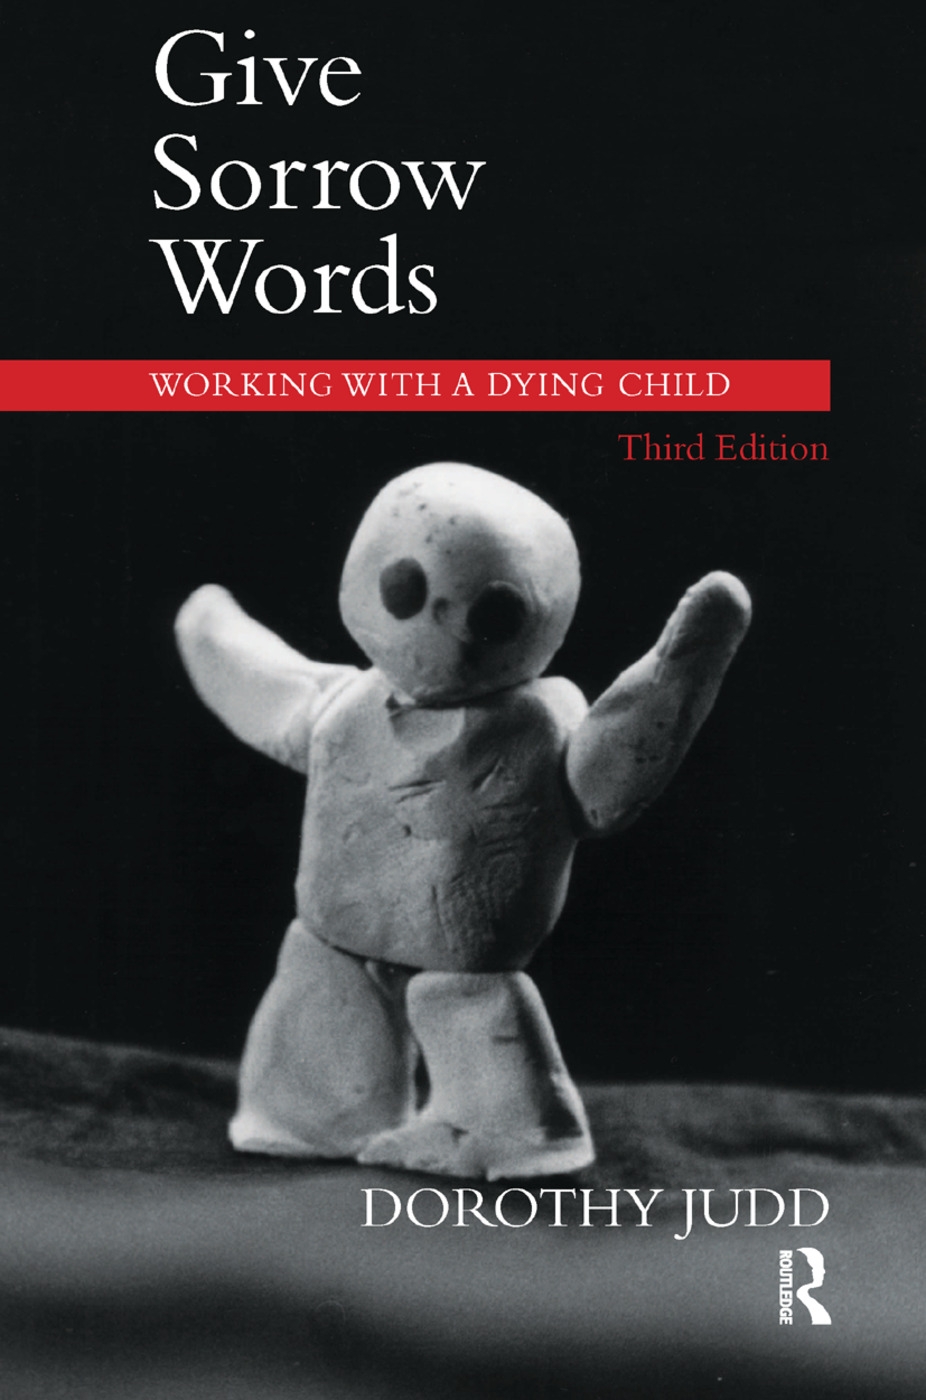 Give Sorrow Words: Working With a Dying Child